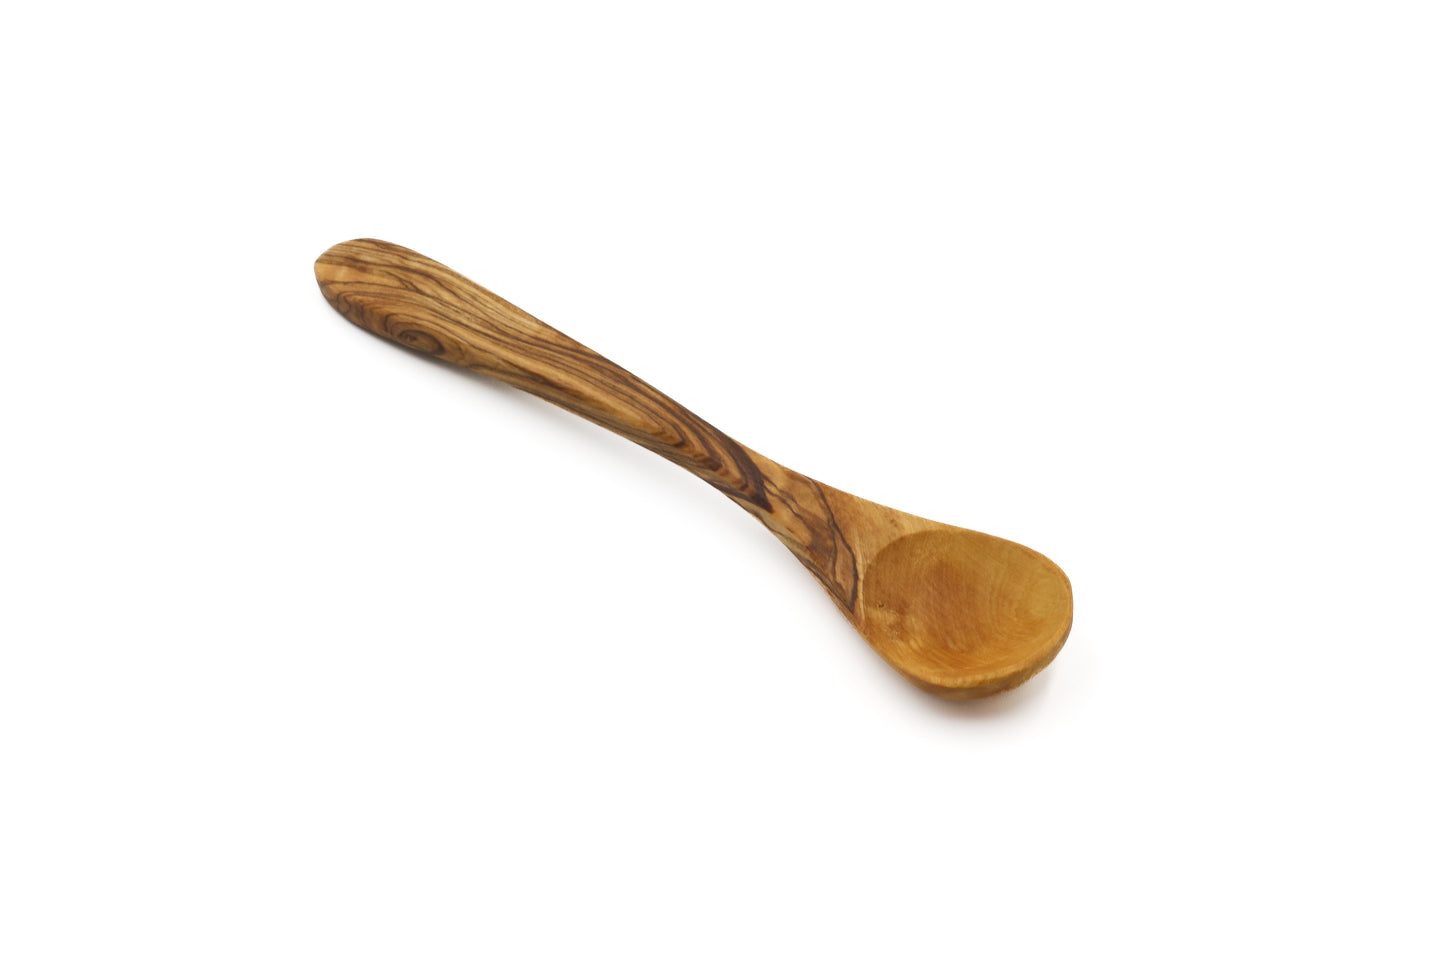 Olive wood small wooden spoon